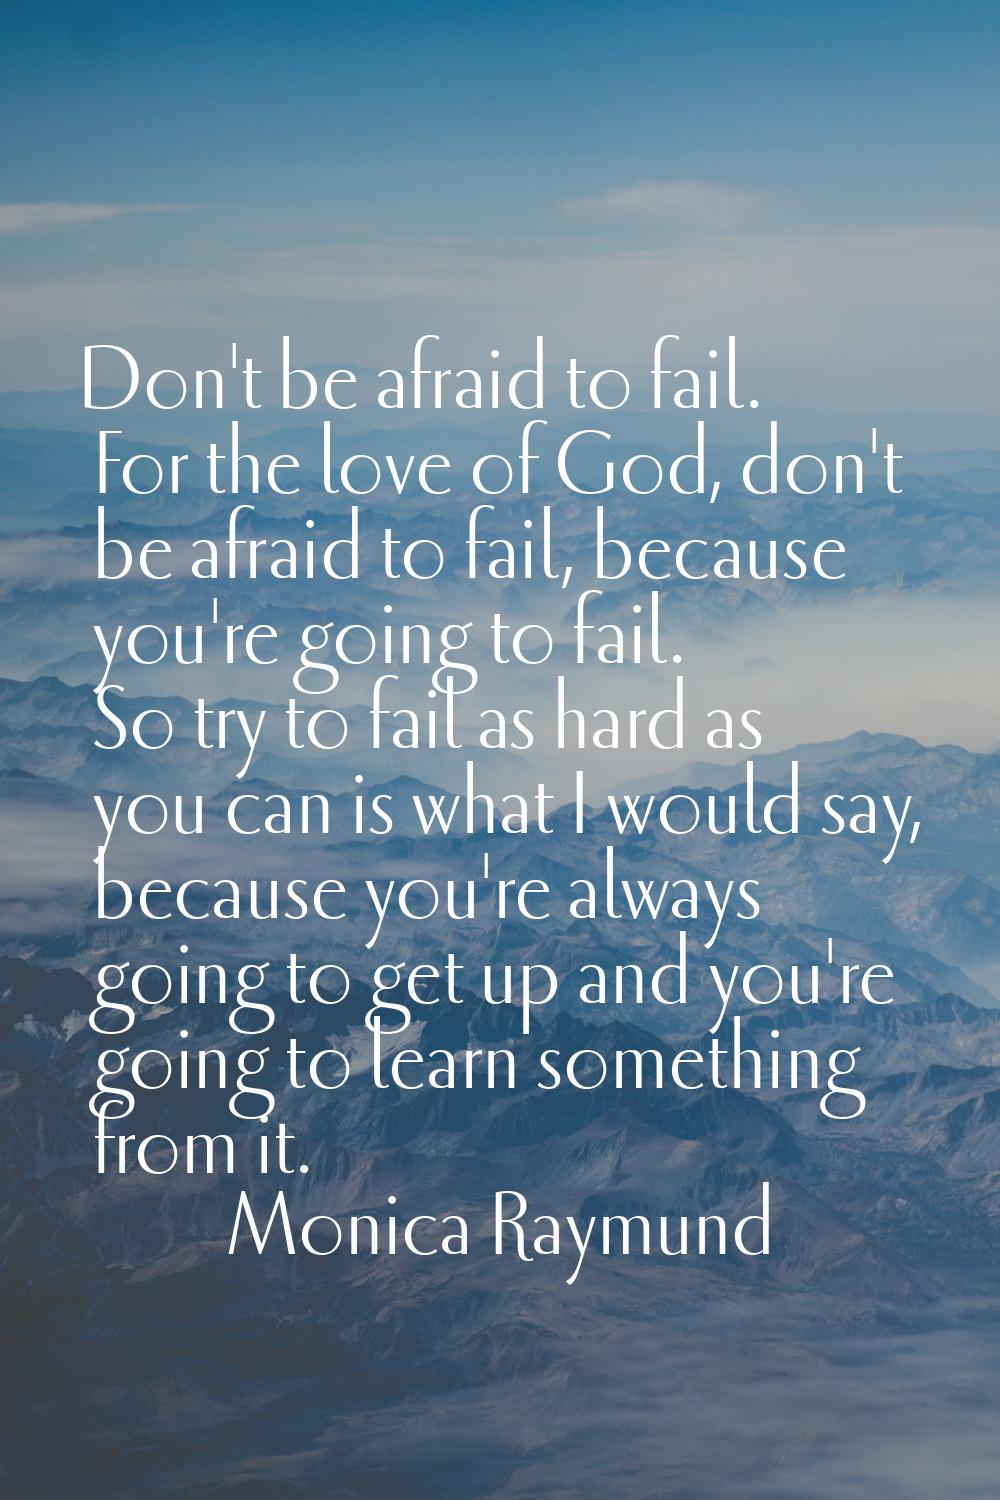 Don't be afraid to fail. For the love of God, don't be afraid to fail, because you're going to fail